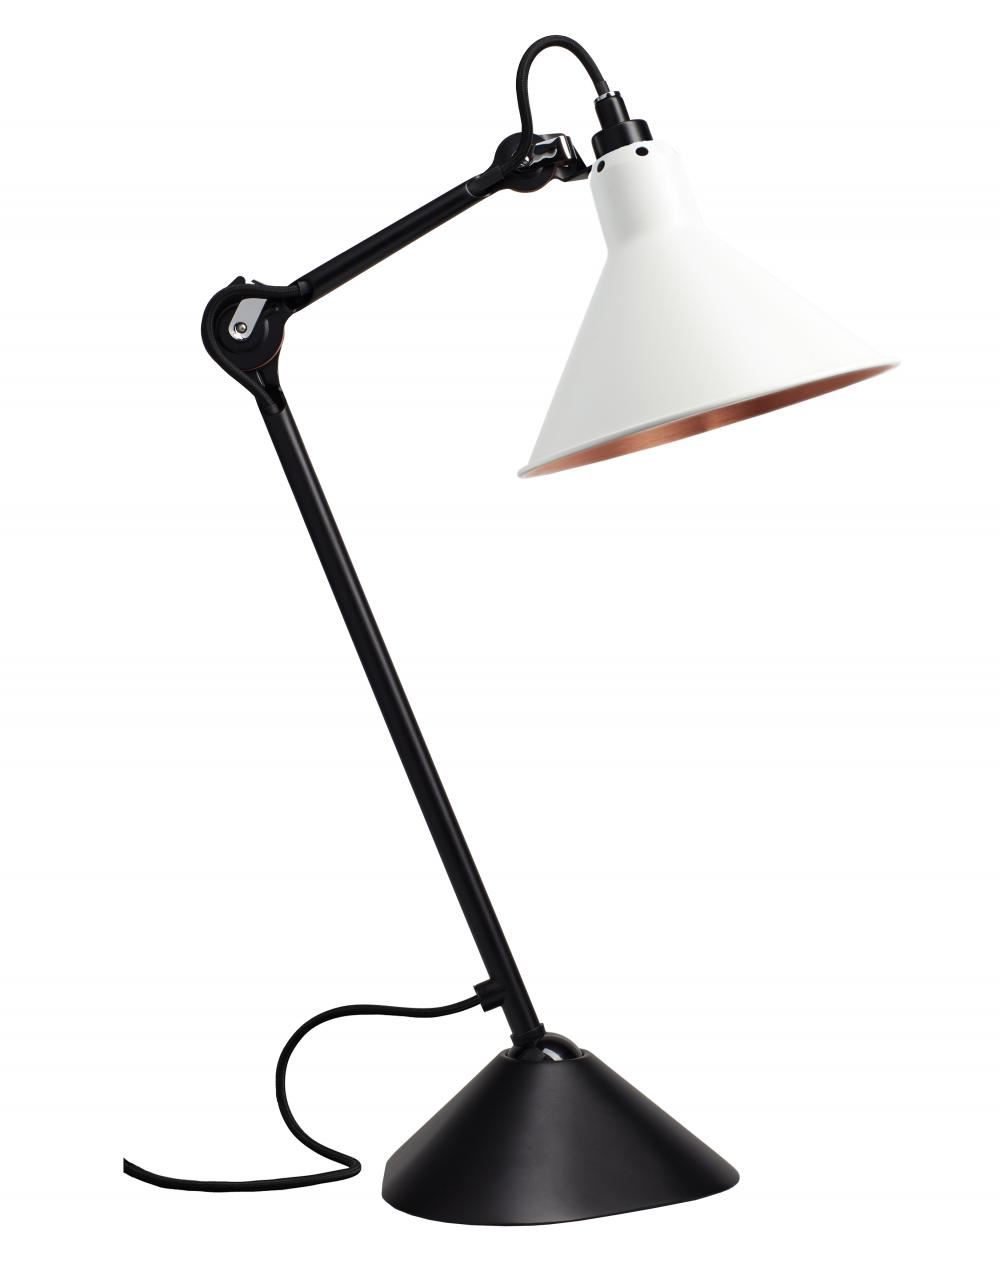 Lampe Gras 205 Table Lamp Satin Black Arm White Shade With Copper Interior Conic